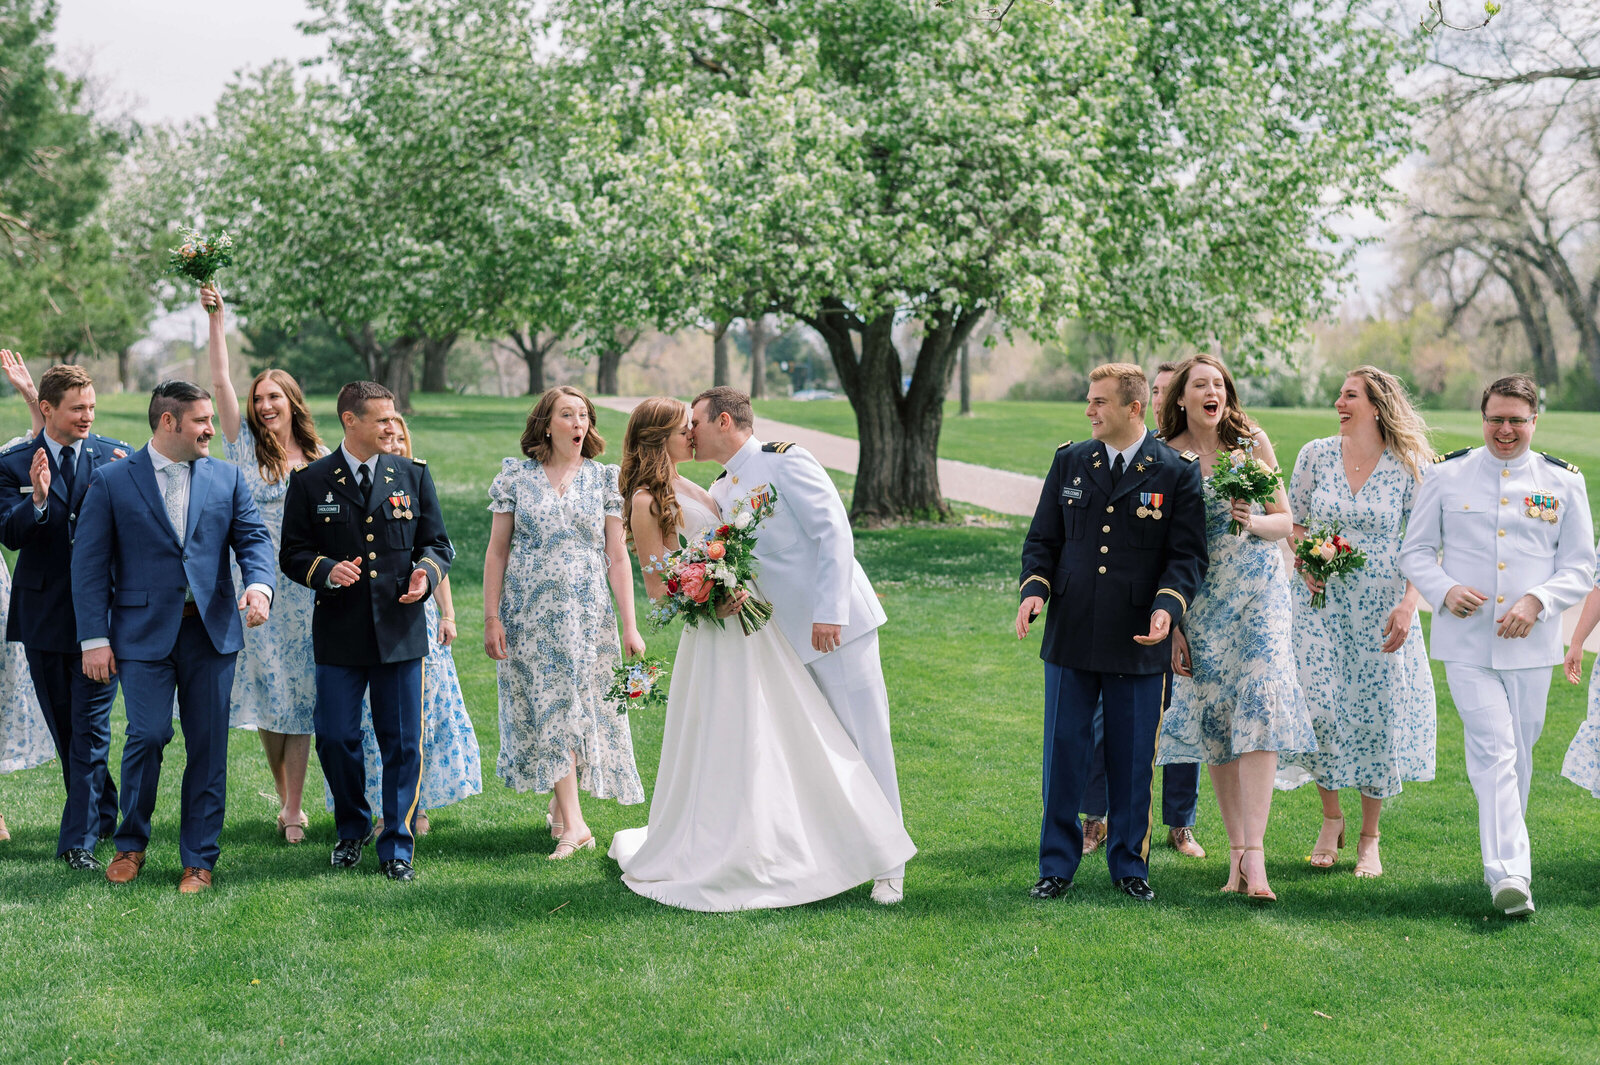 Bridal party walks and cheers as the bride and groom passionately kiss